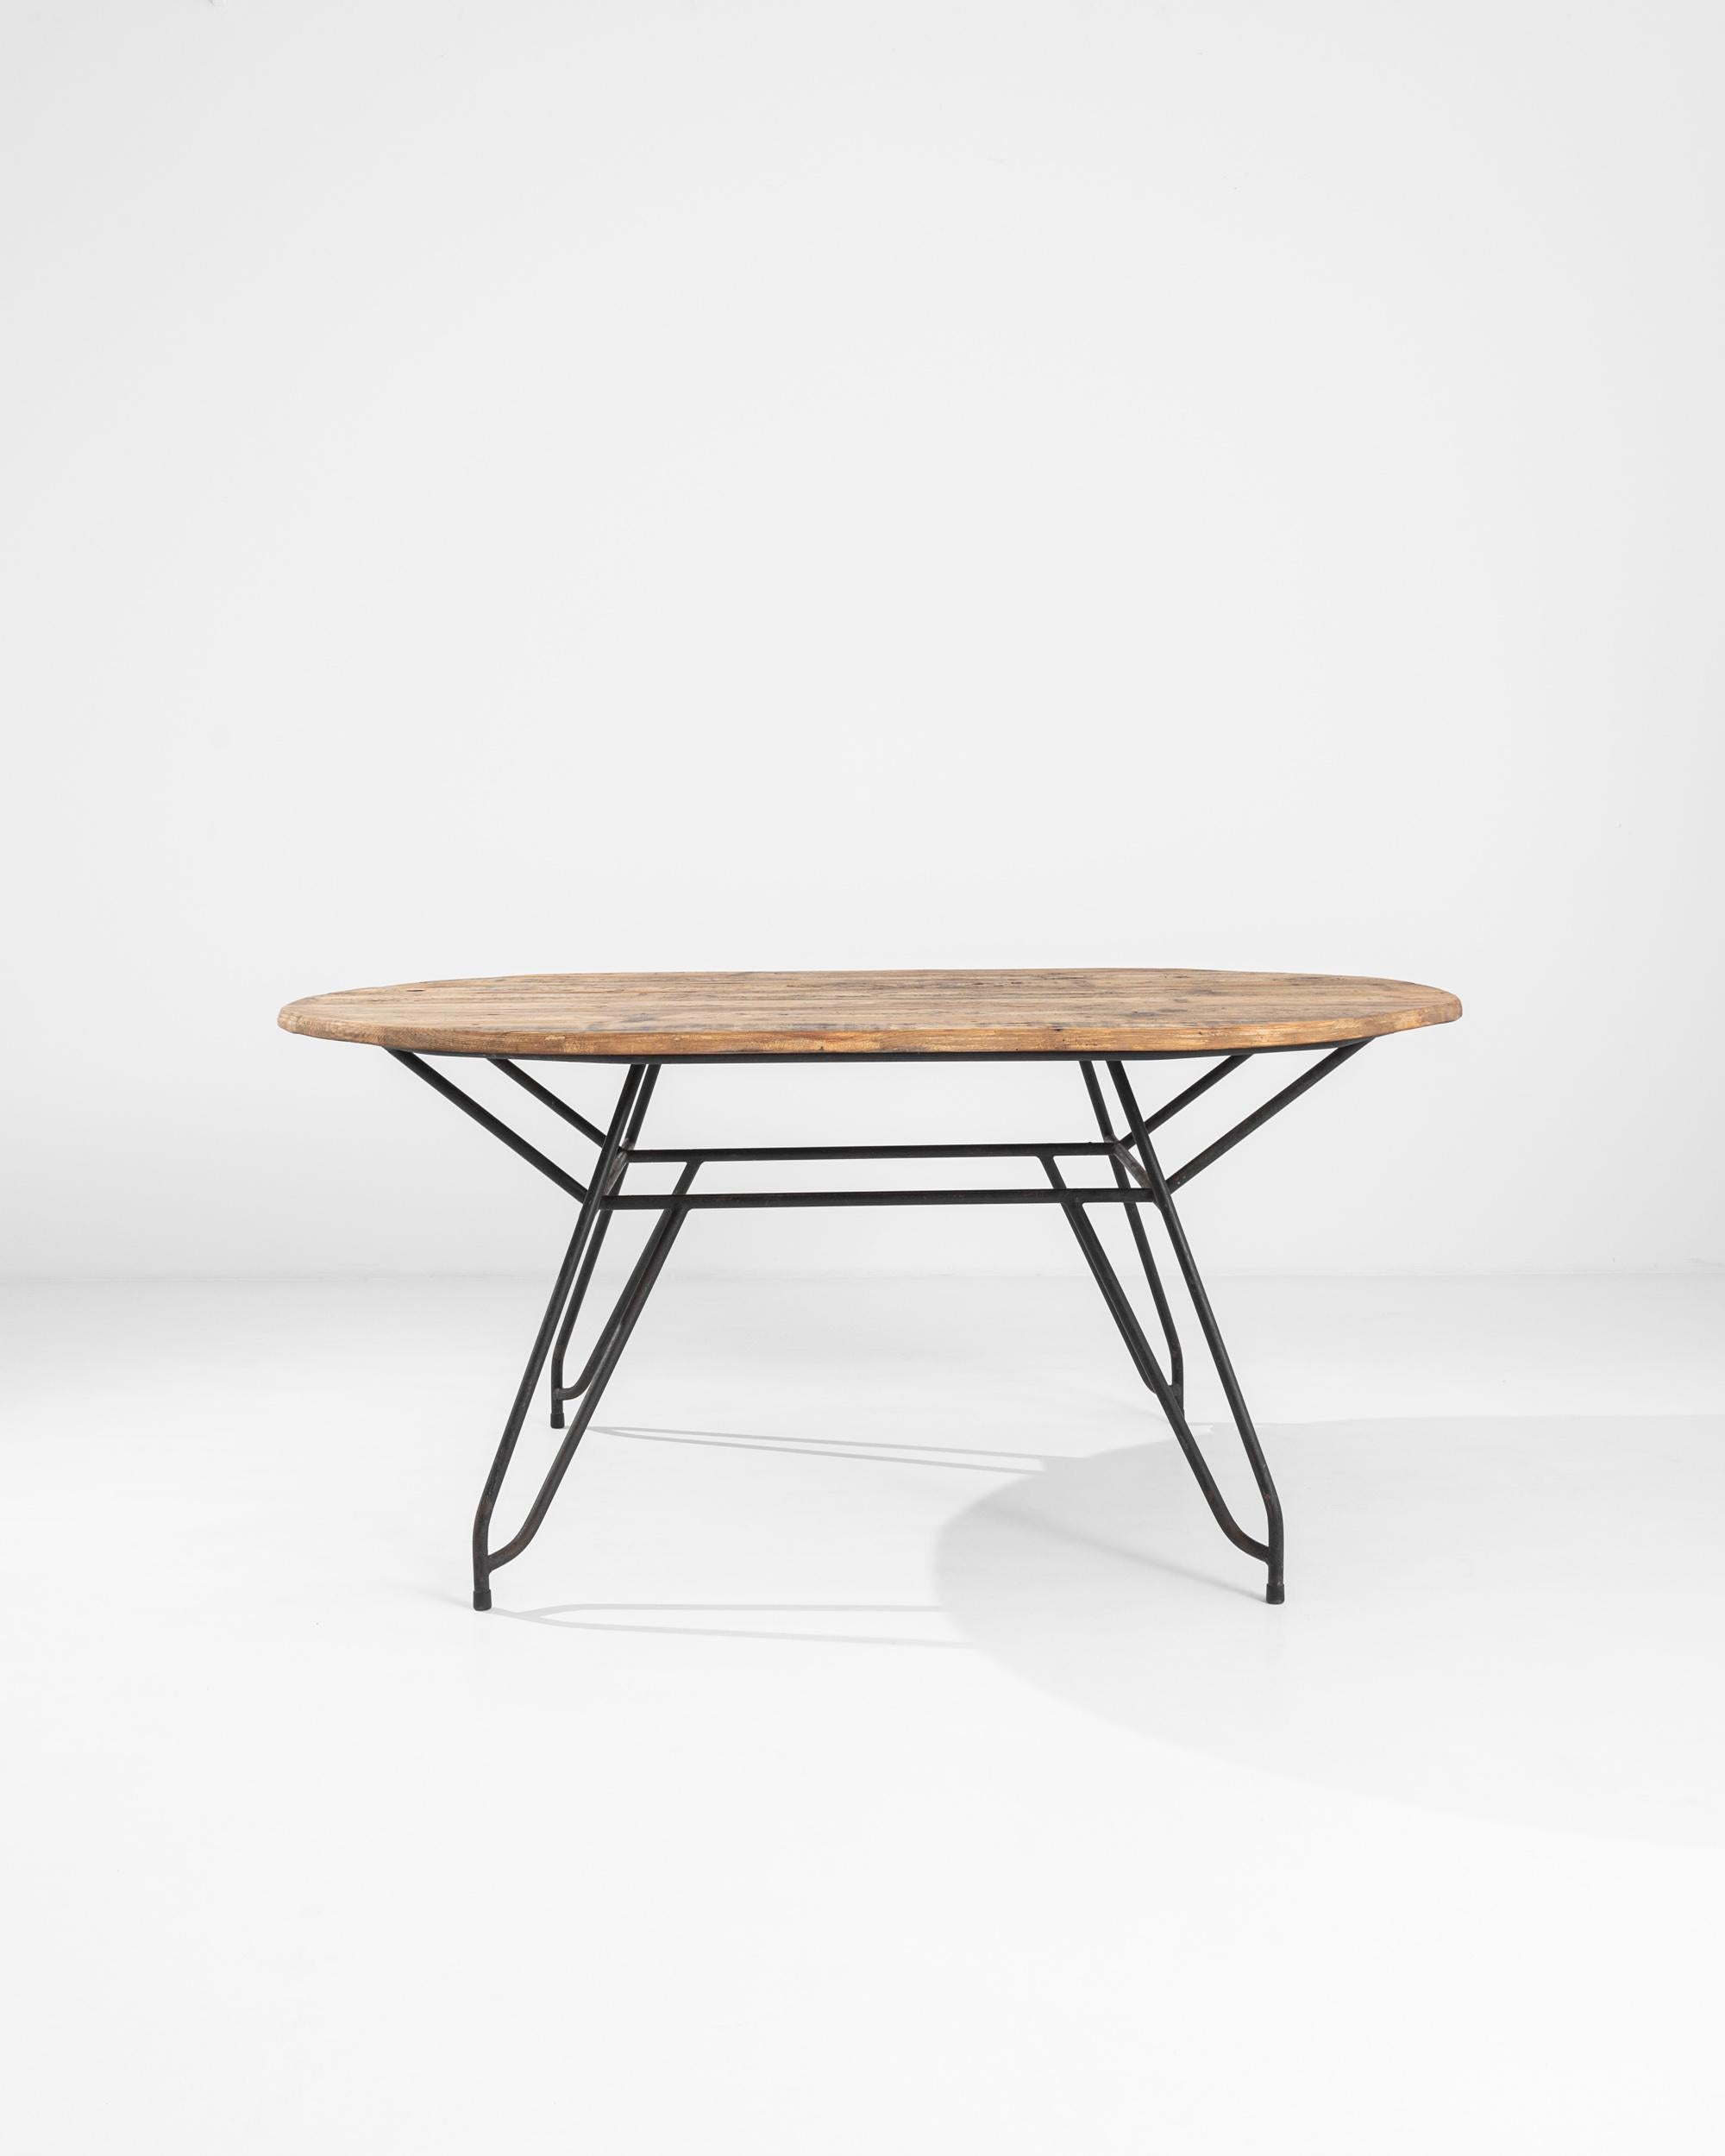 A metal midcentury French table with a wooden top. Solid hairpin legs extend diagonally at each corner, conjoined with a pleasing geometric network of supports. Solid planks of pleasantly worn lumber connect to form a charmingly rustic table top.